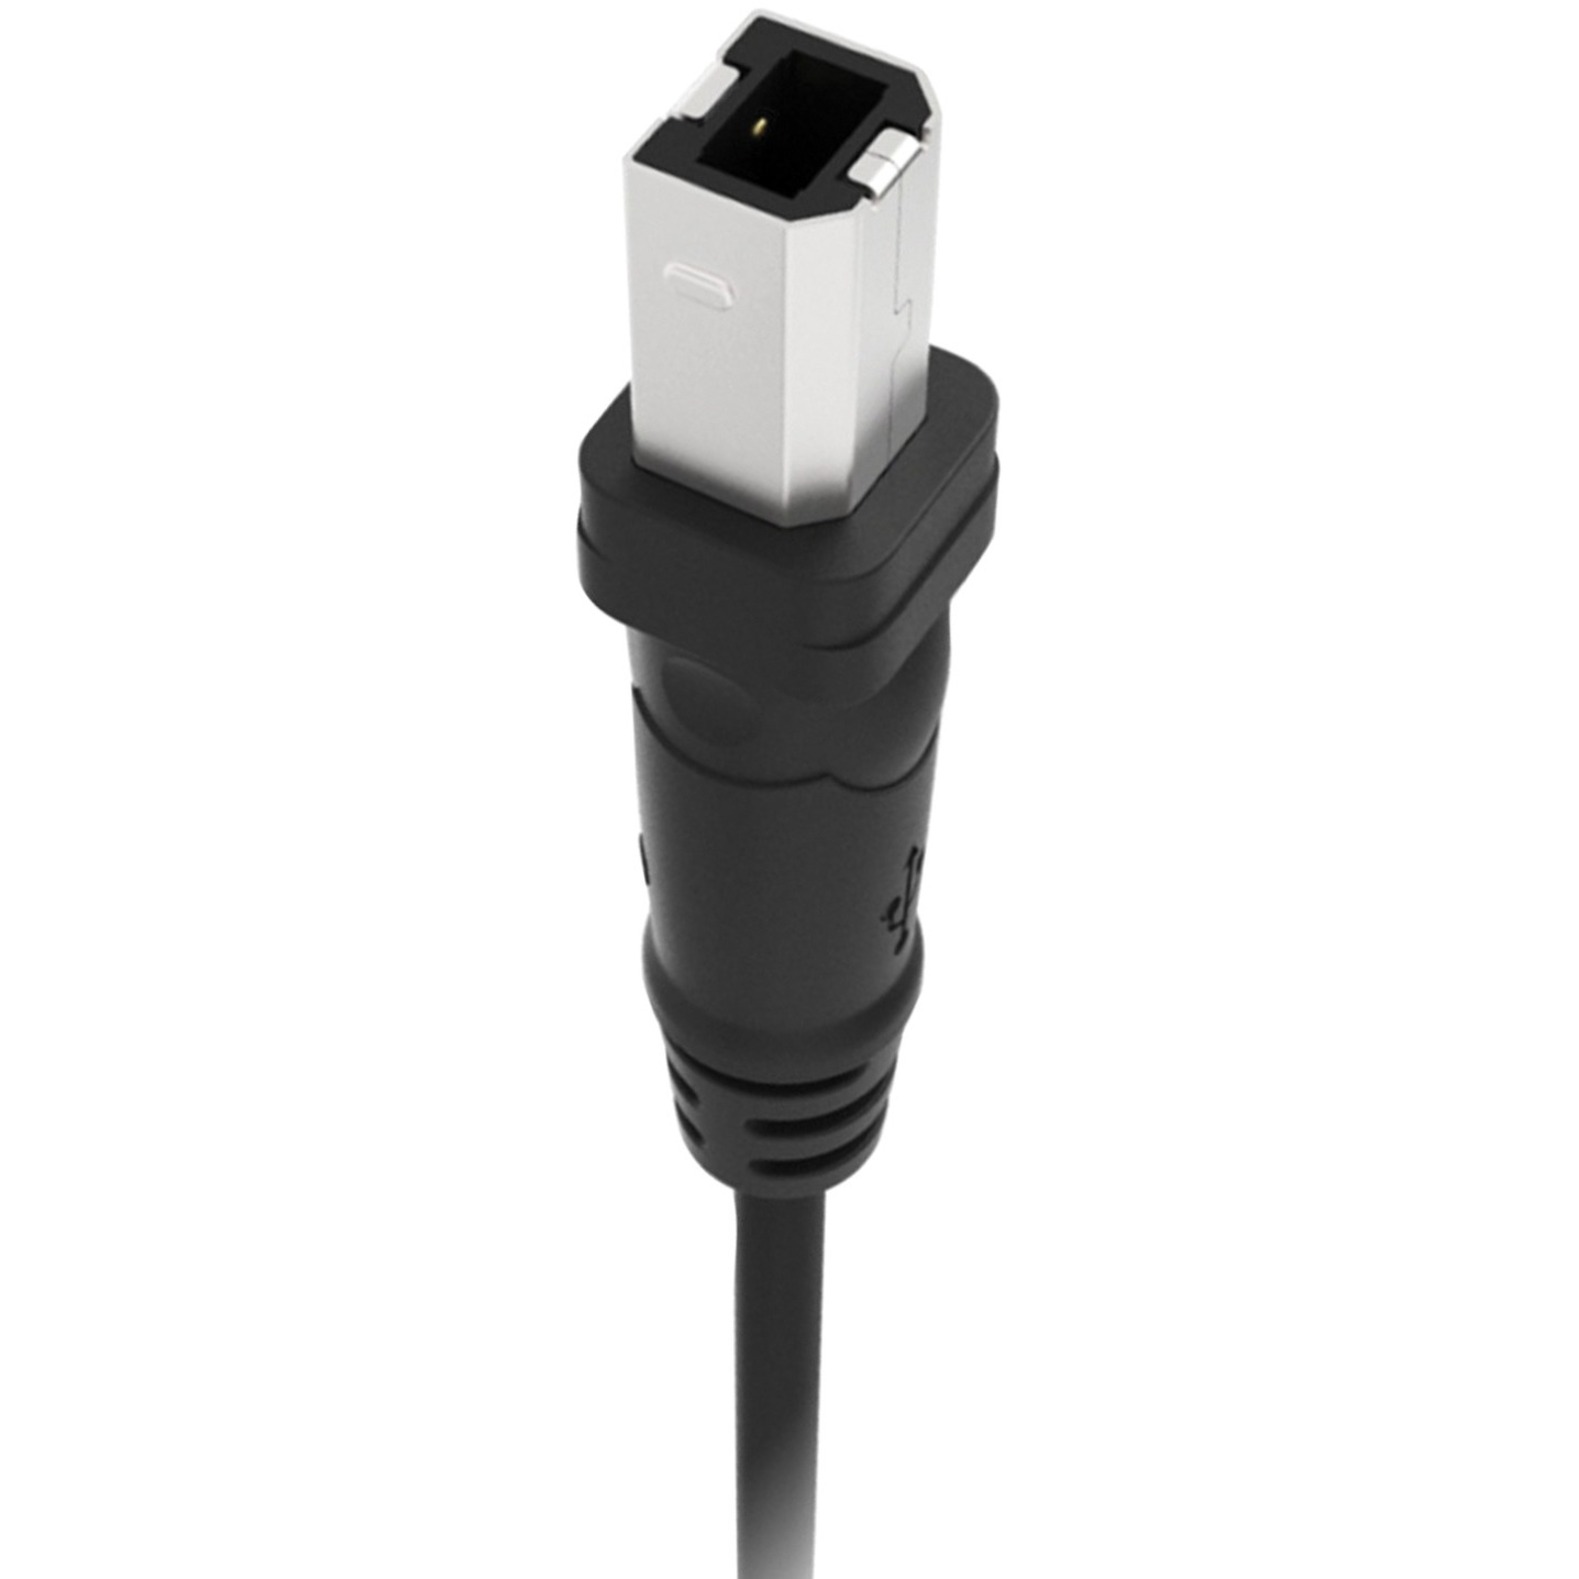 Belkin F3U133B10 10 ft. Hi-Speed Type A Male USB 2.0 to Type B Male USB 2.0 Cable - image 3 of 3